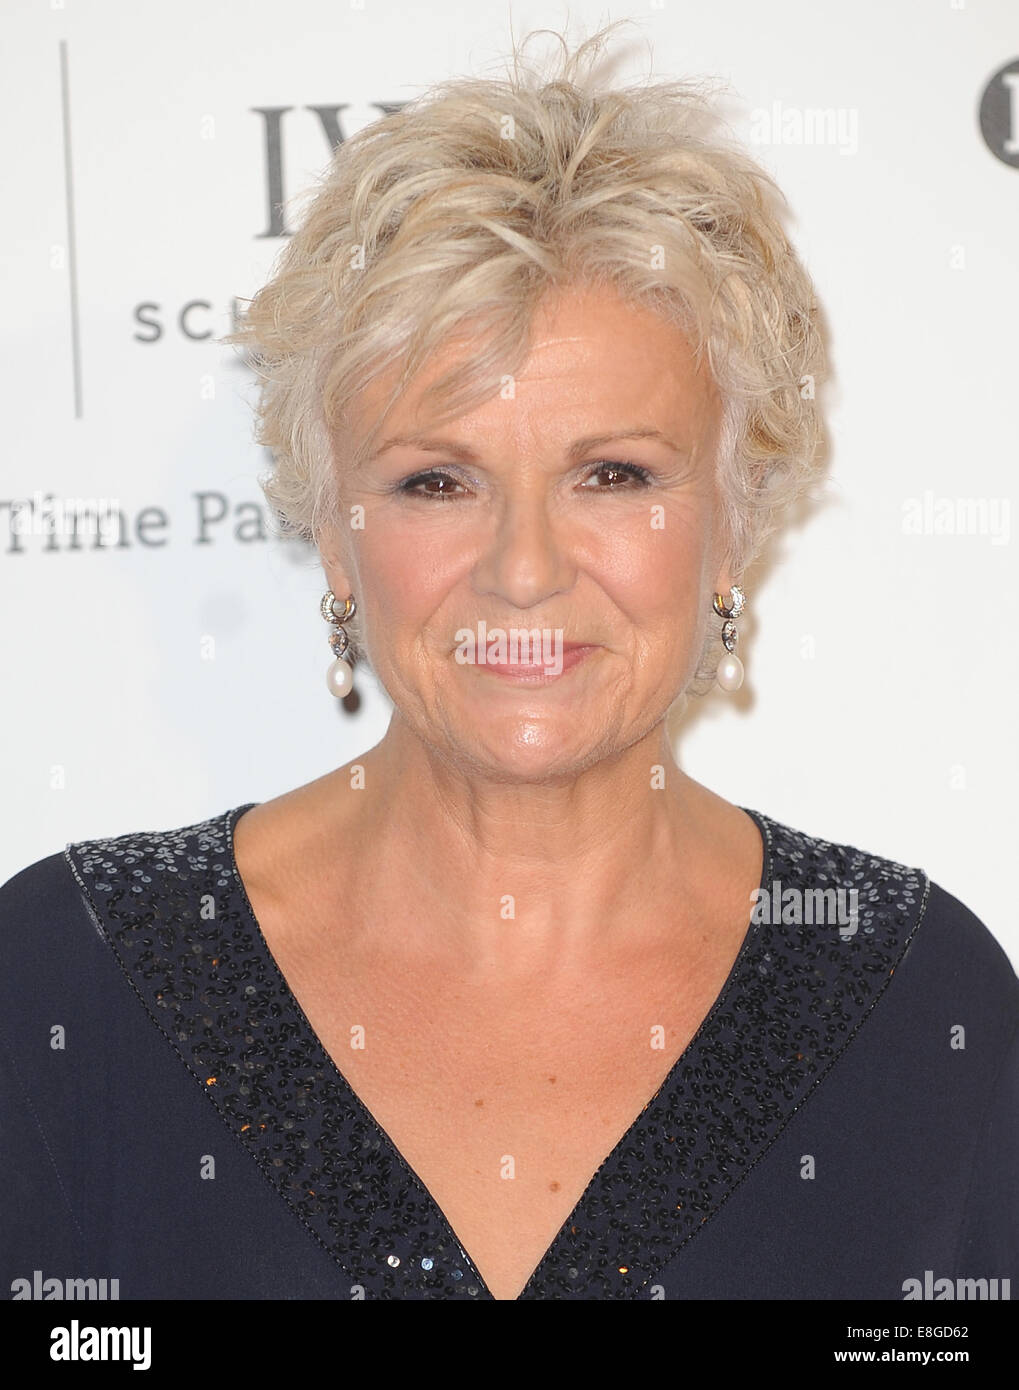 Julie pictures walters of Actress Julie